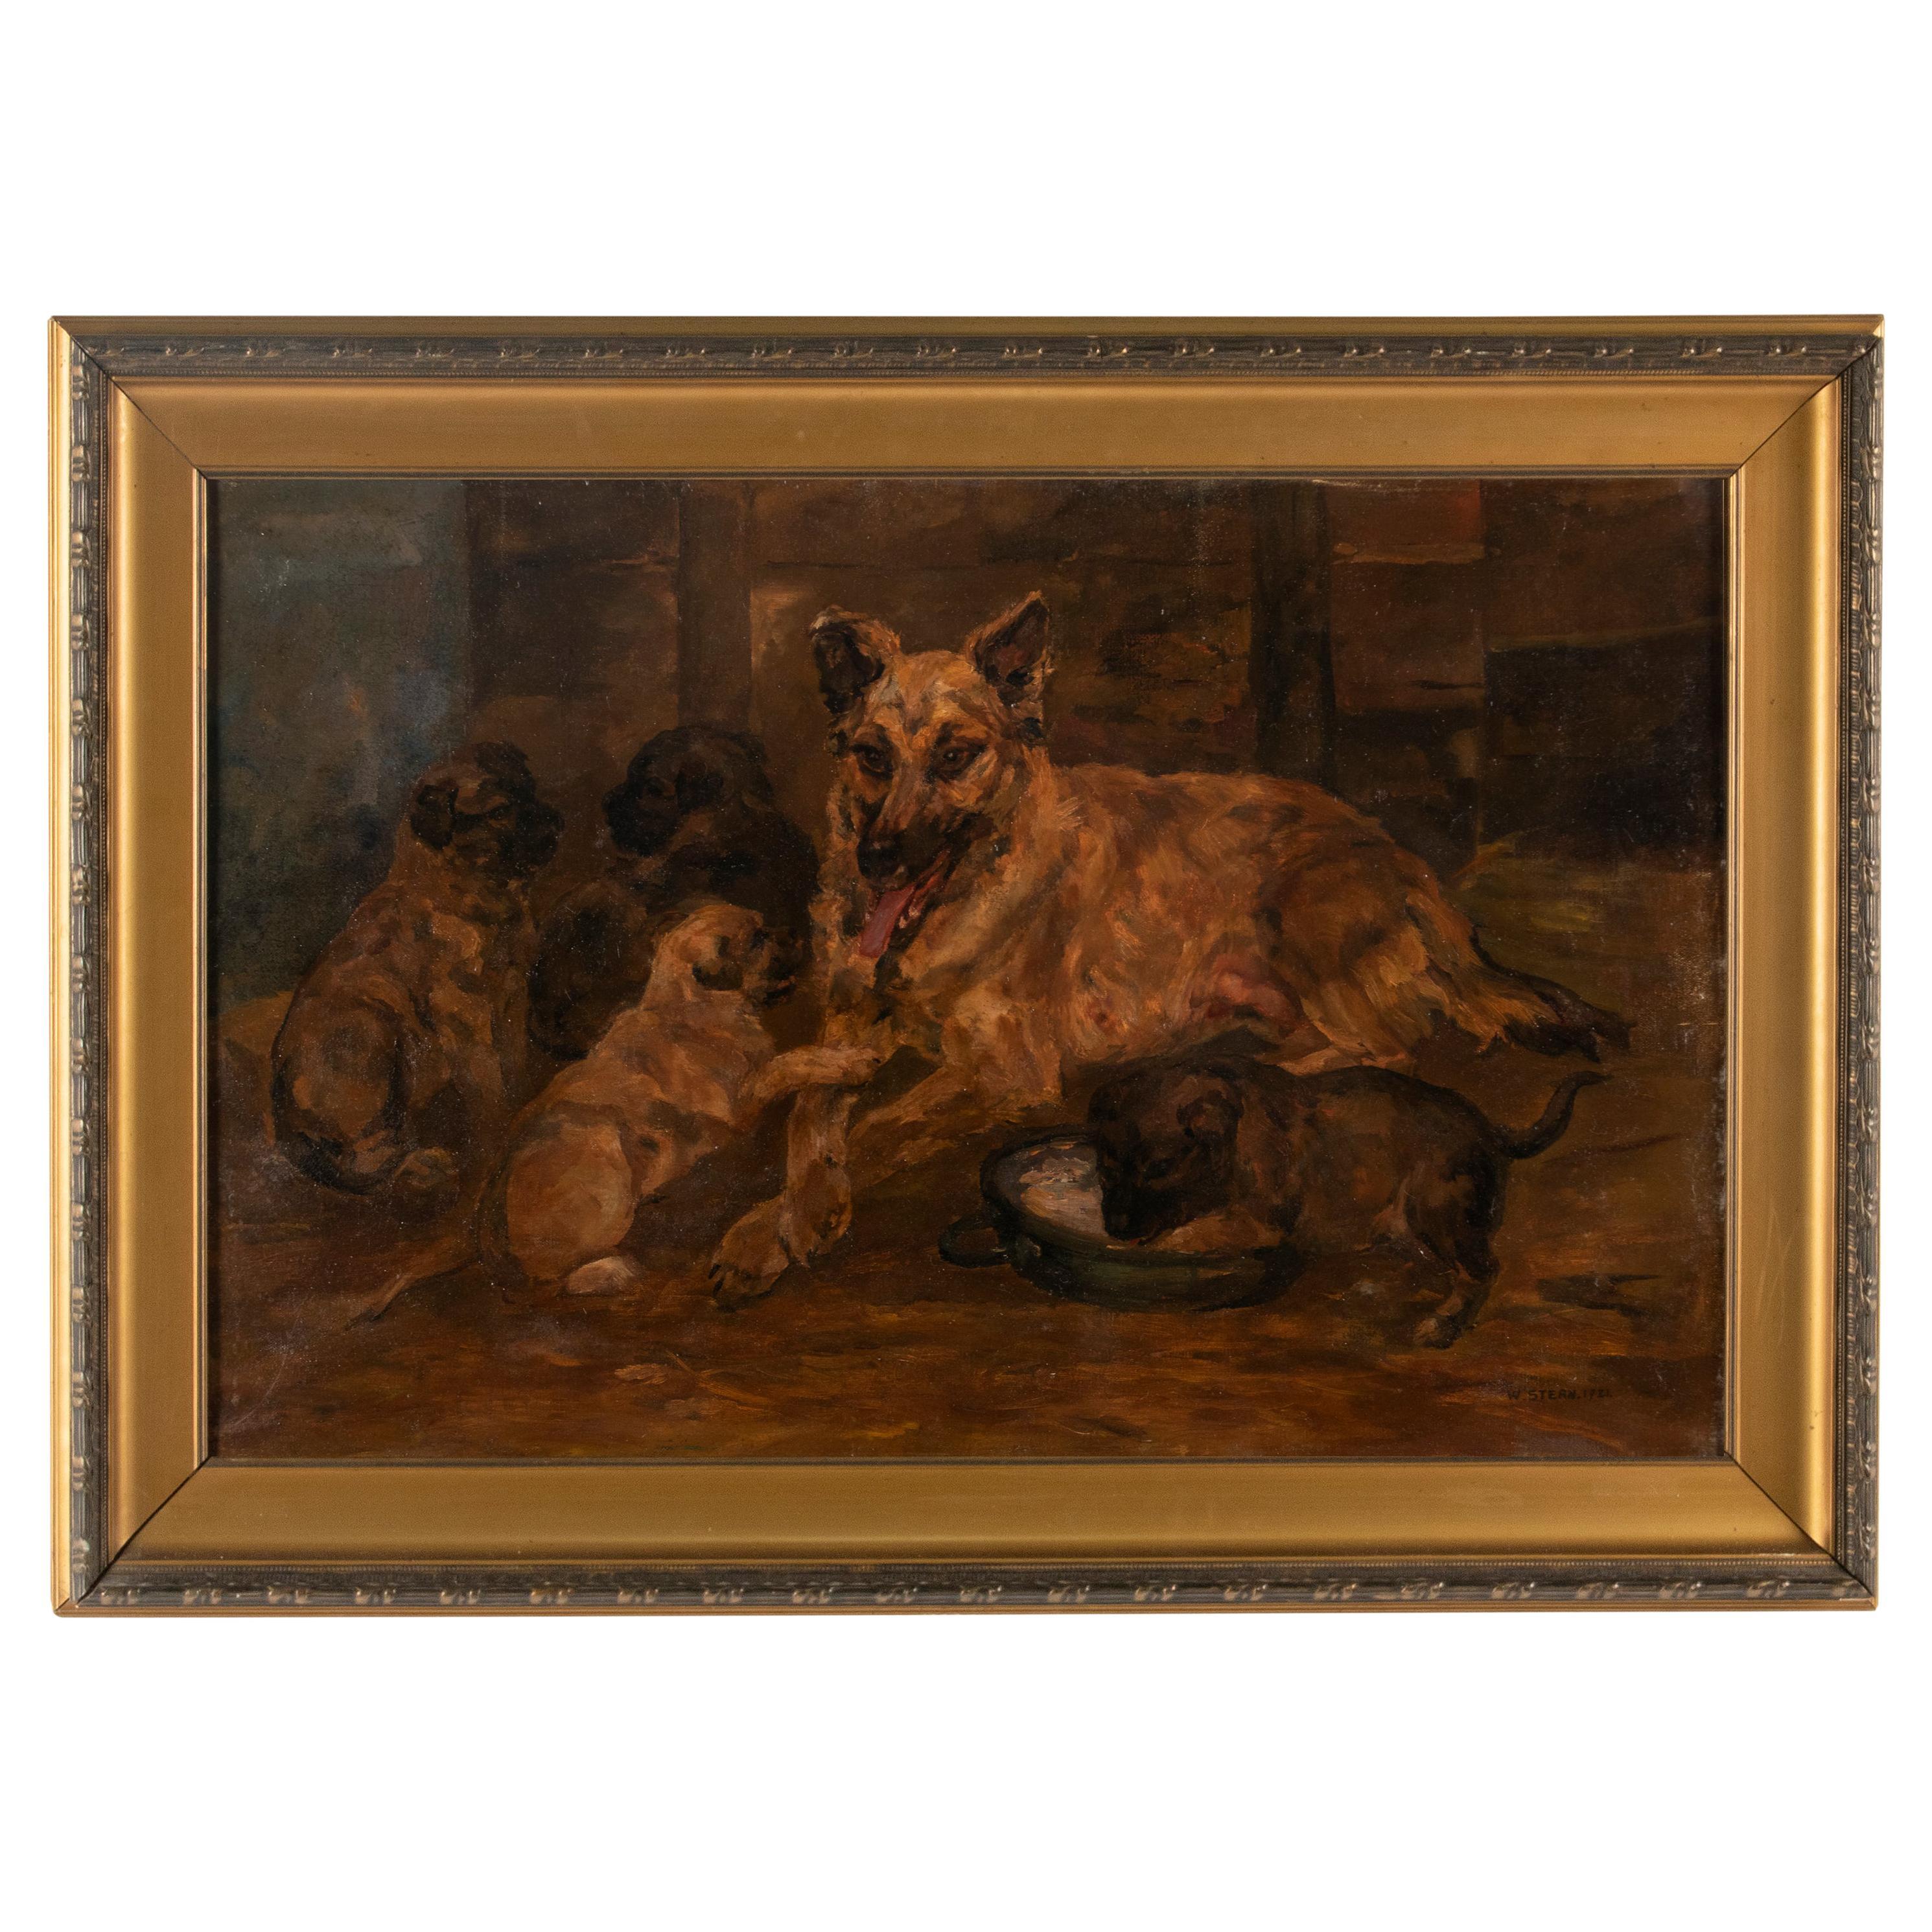 Antique Dog Painting by William Stern, Dated 1921, Shepherd Dog with Puppies